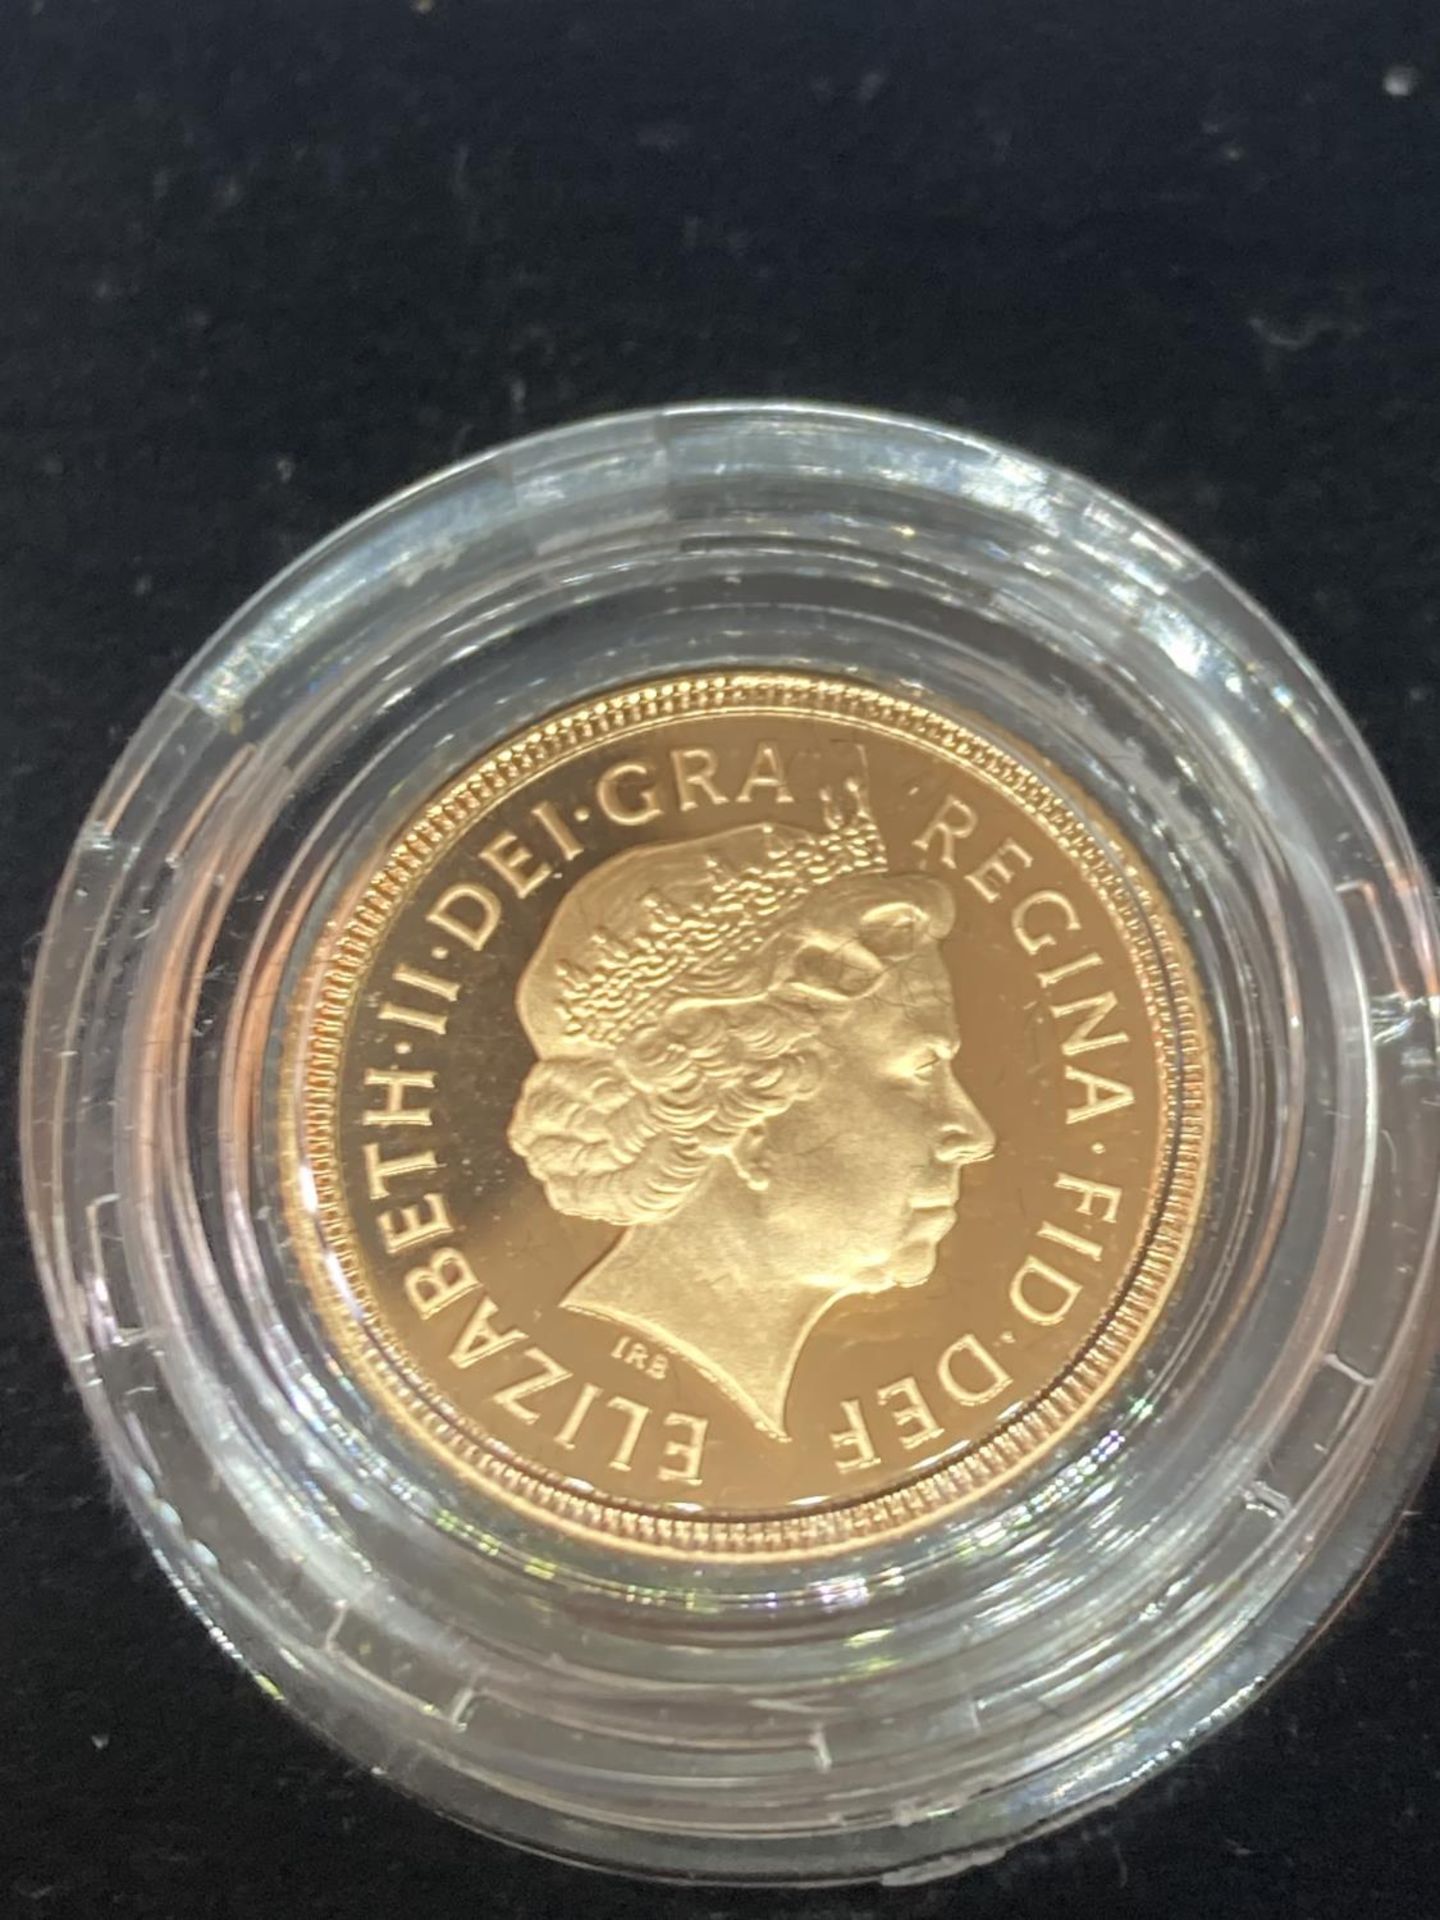 A 2002 ROYAL MINT GOLD PROOF FOUR COIN COLLECTION CELEBRATING QUEEN ELIZABETH II GOLDEN JUBILEE TO - Image 9 of 11